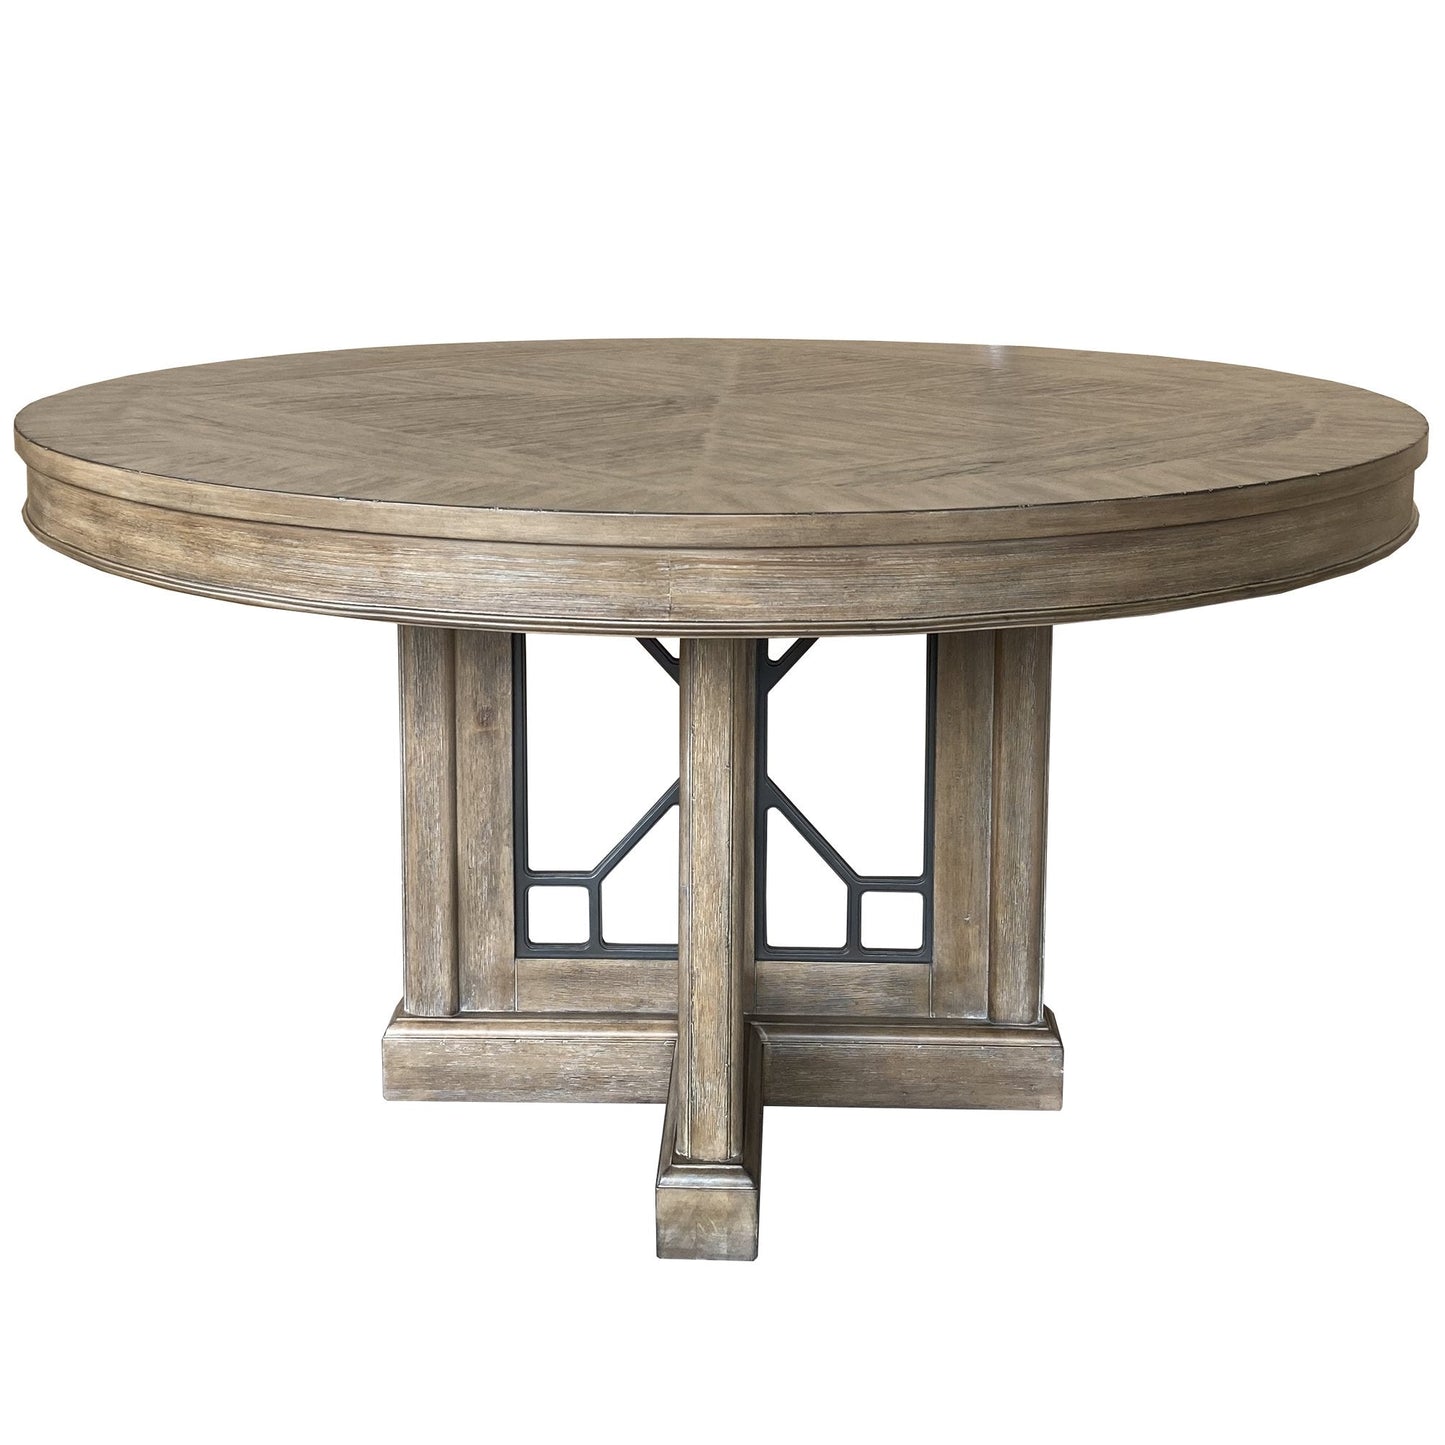 SUNDANCE DINING - SANDSTONE DINING TABLE 54 IN. ROUND